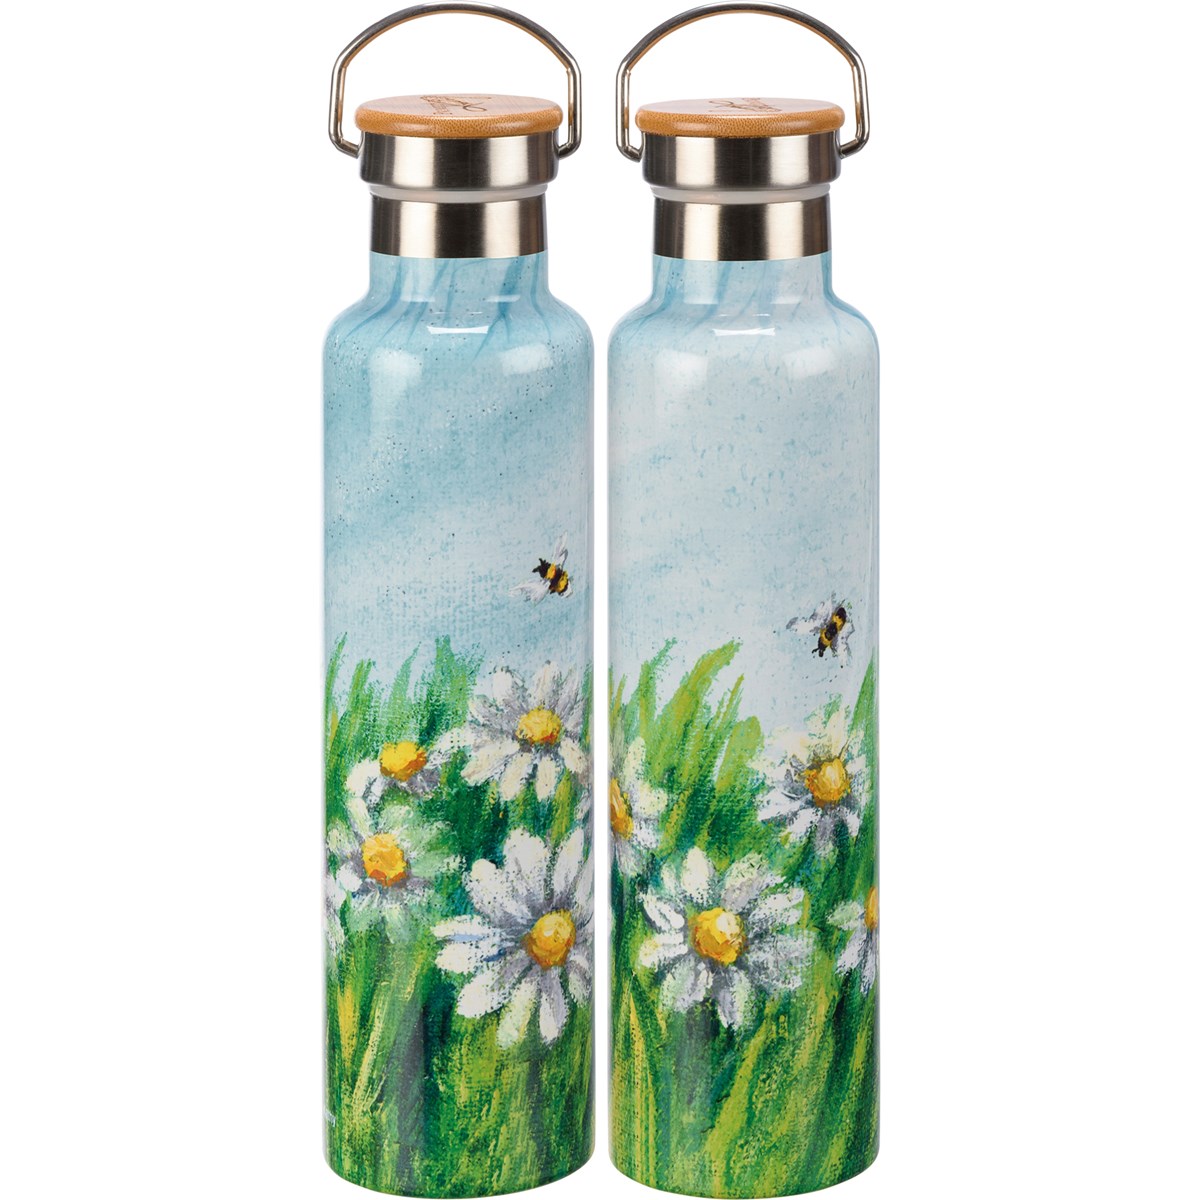 Daisies Insulated Bottle - Stainless Steel, Bamboo